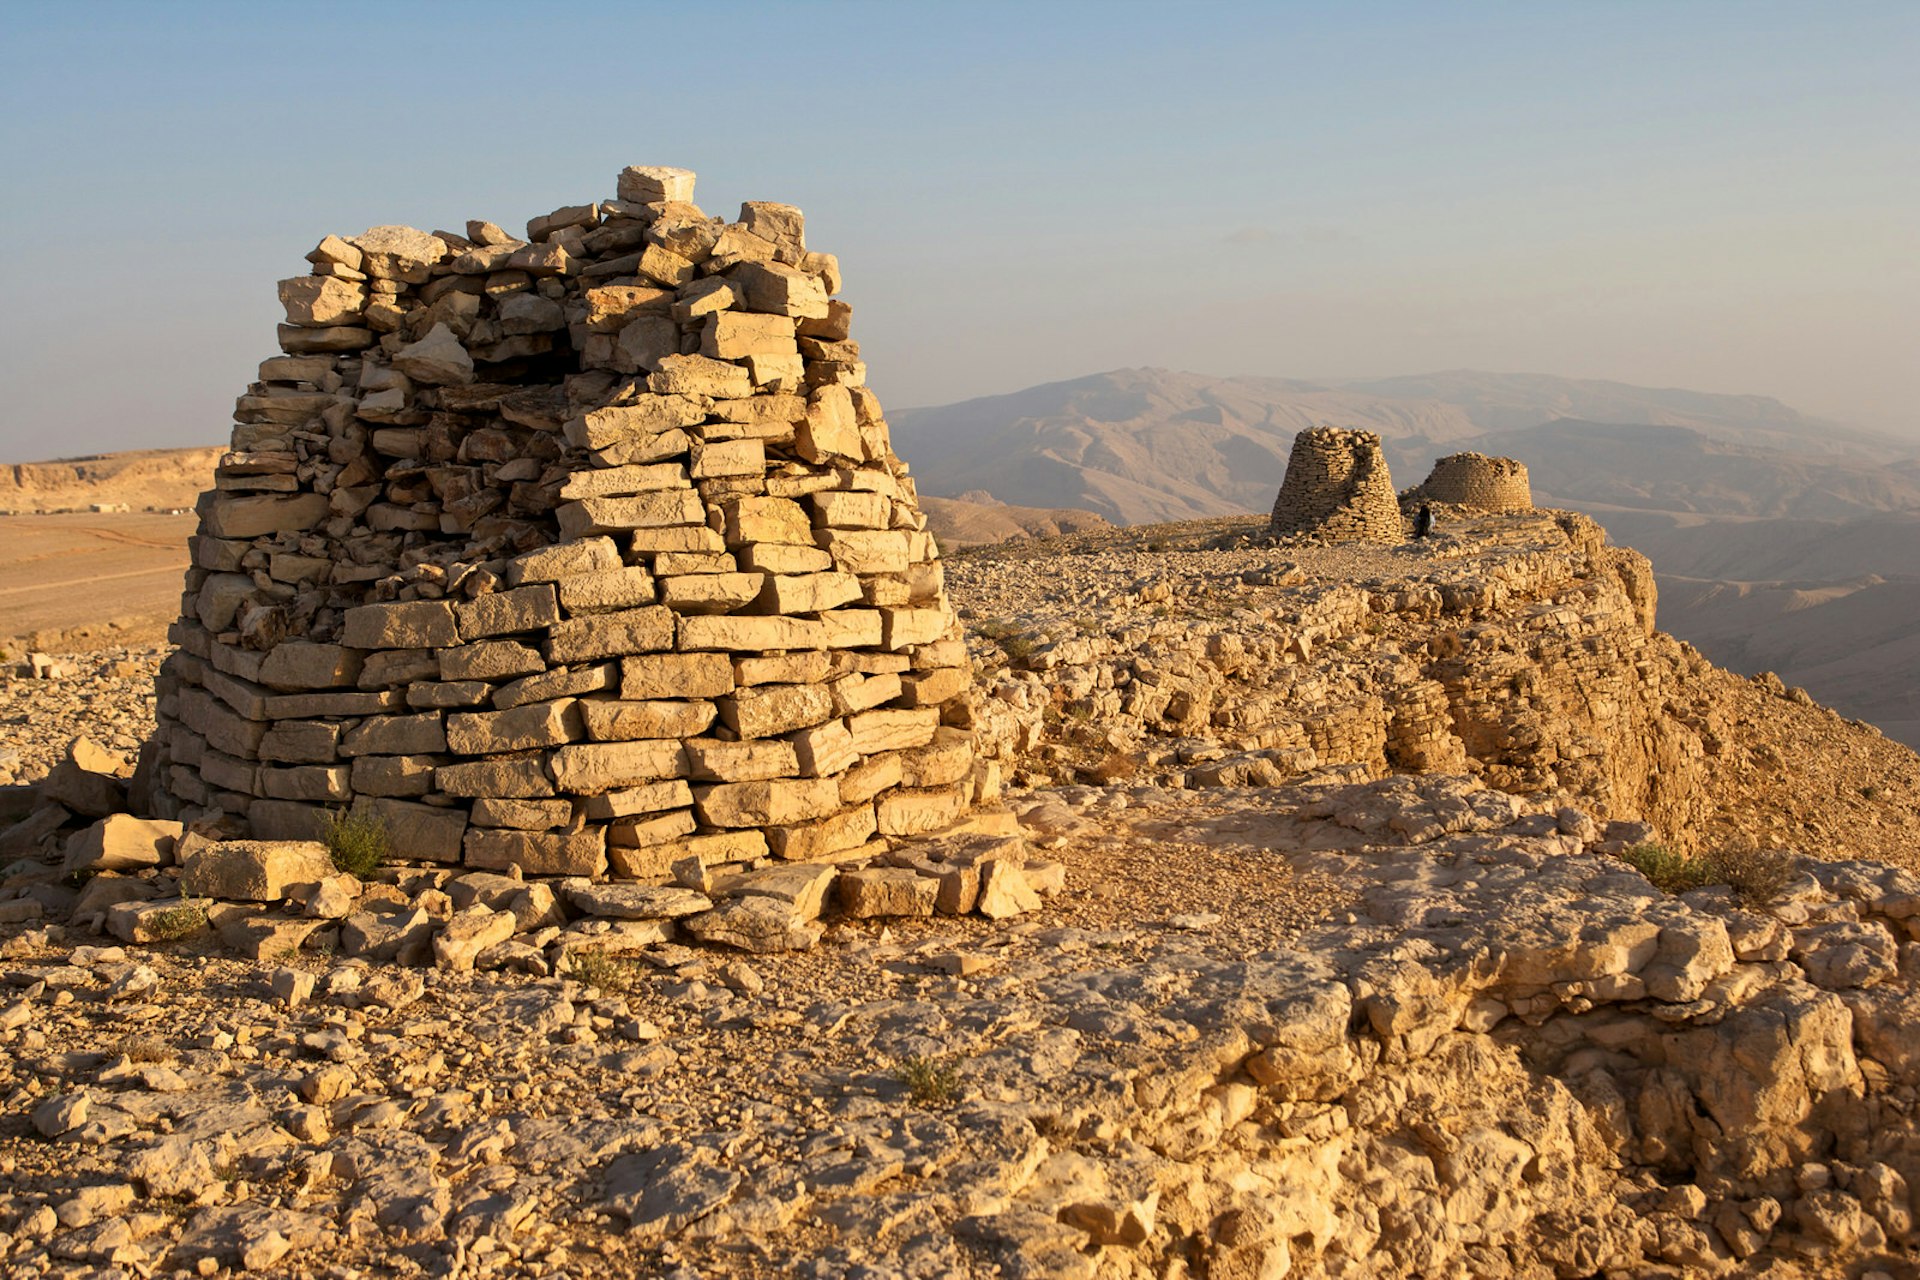 Lined up dramatically atop a rocky ridge, the Beehive Tombs of Bat, in Oman, are among the most unique ensemble of 4000-5000 year-old burial monuments, towers and remains of settlement in the Arabian Peninsula. They are a Unesco World Heritage Site © ZambeziShark / Getty Images